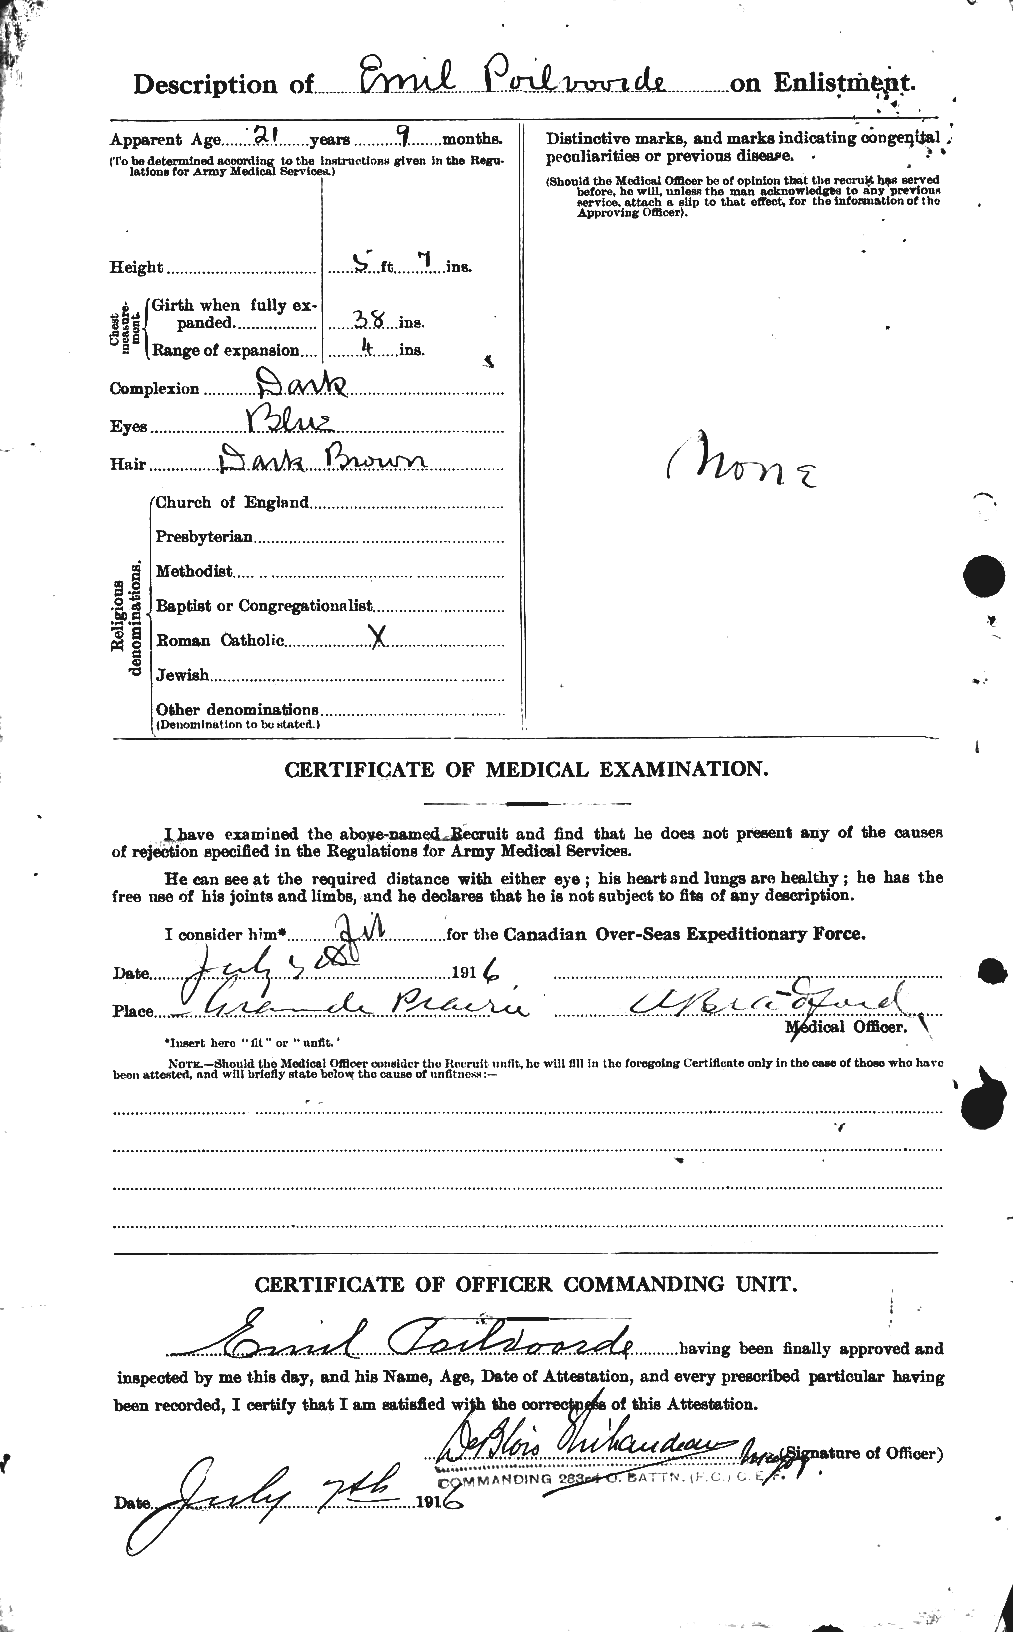 Personnel Records of the First World War - CEF 579277b